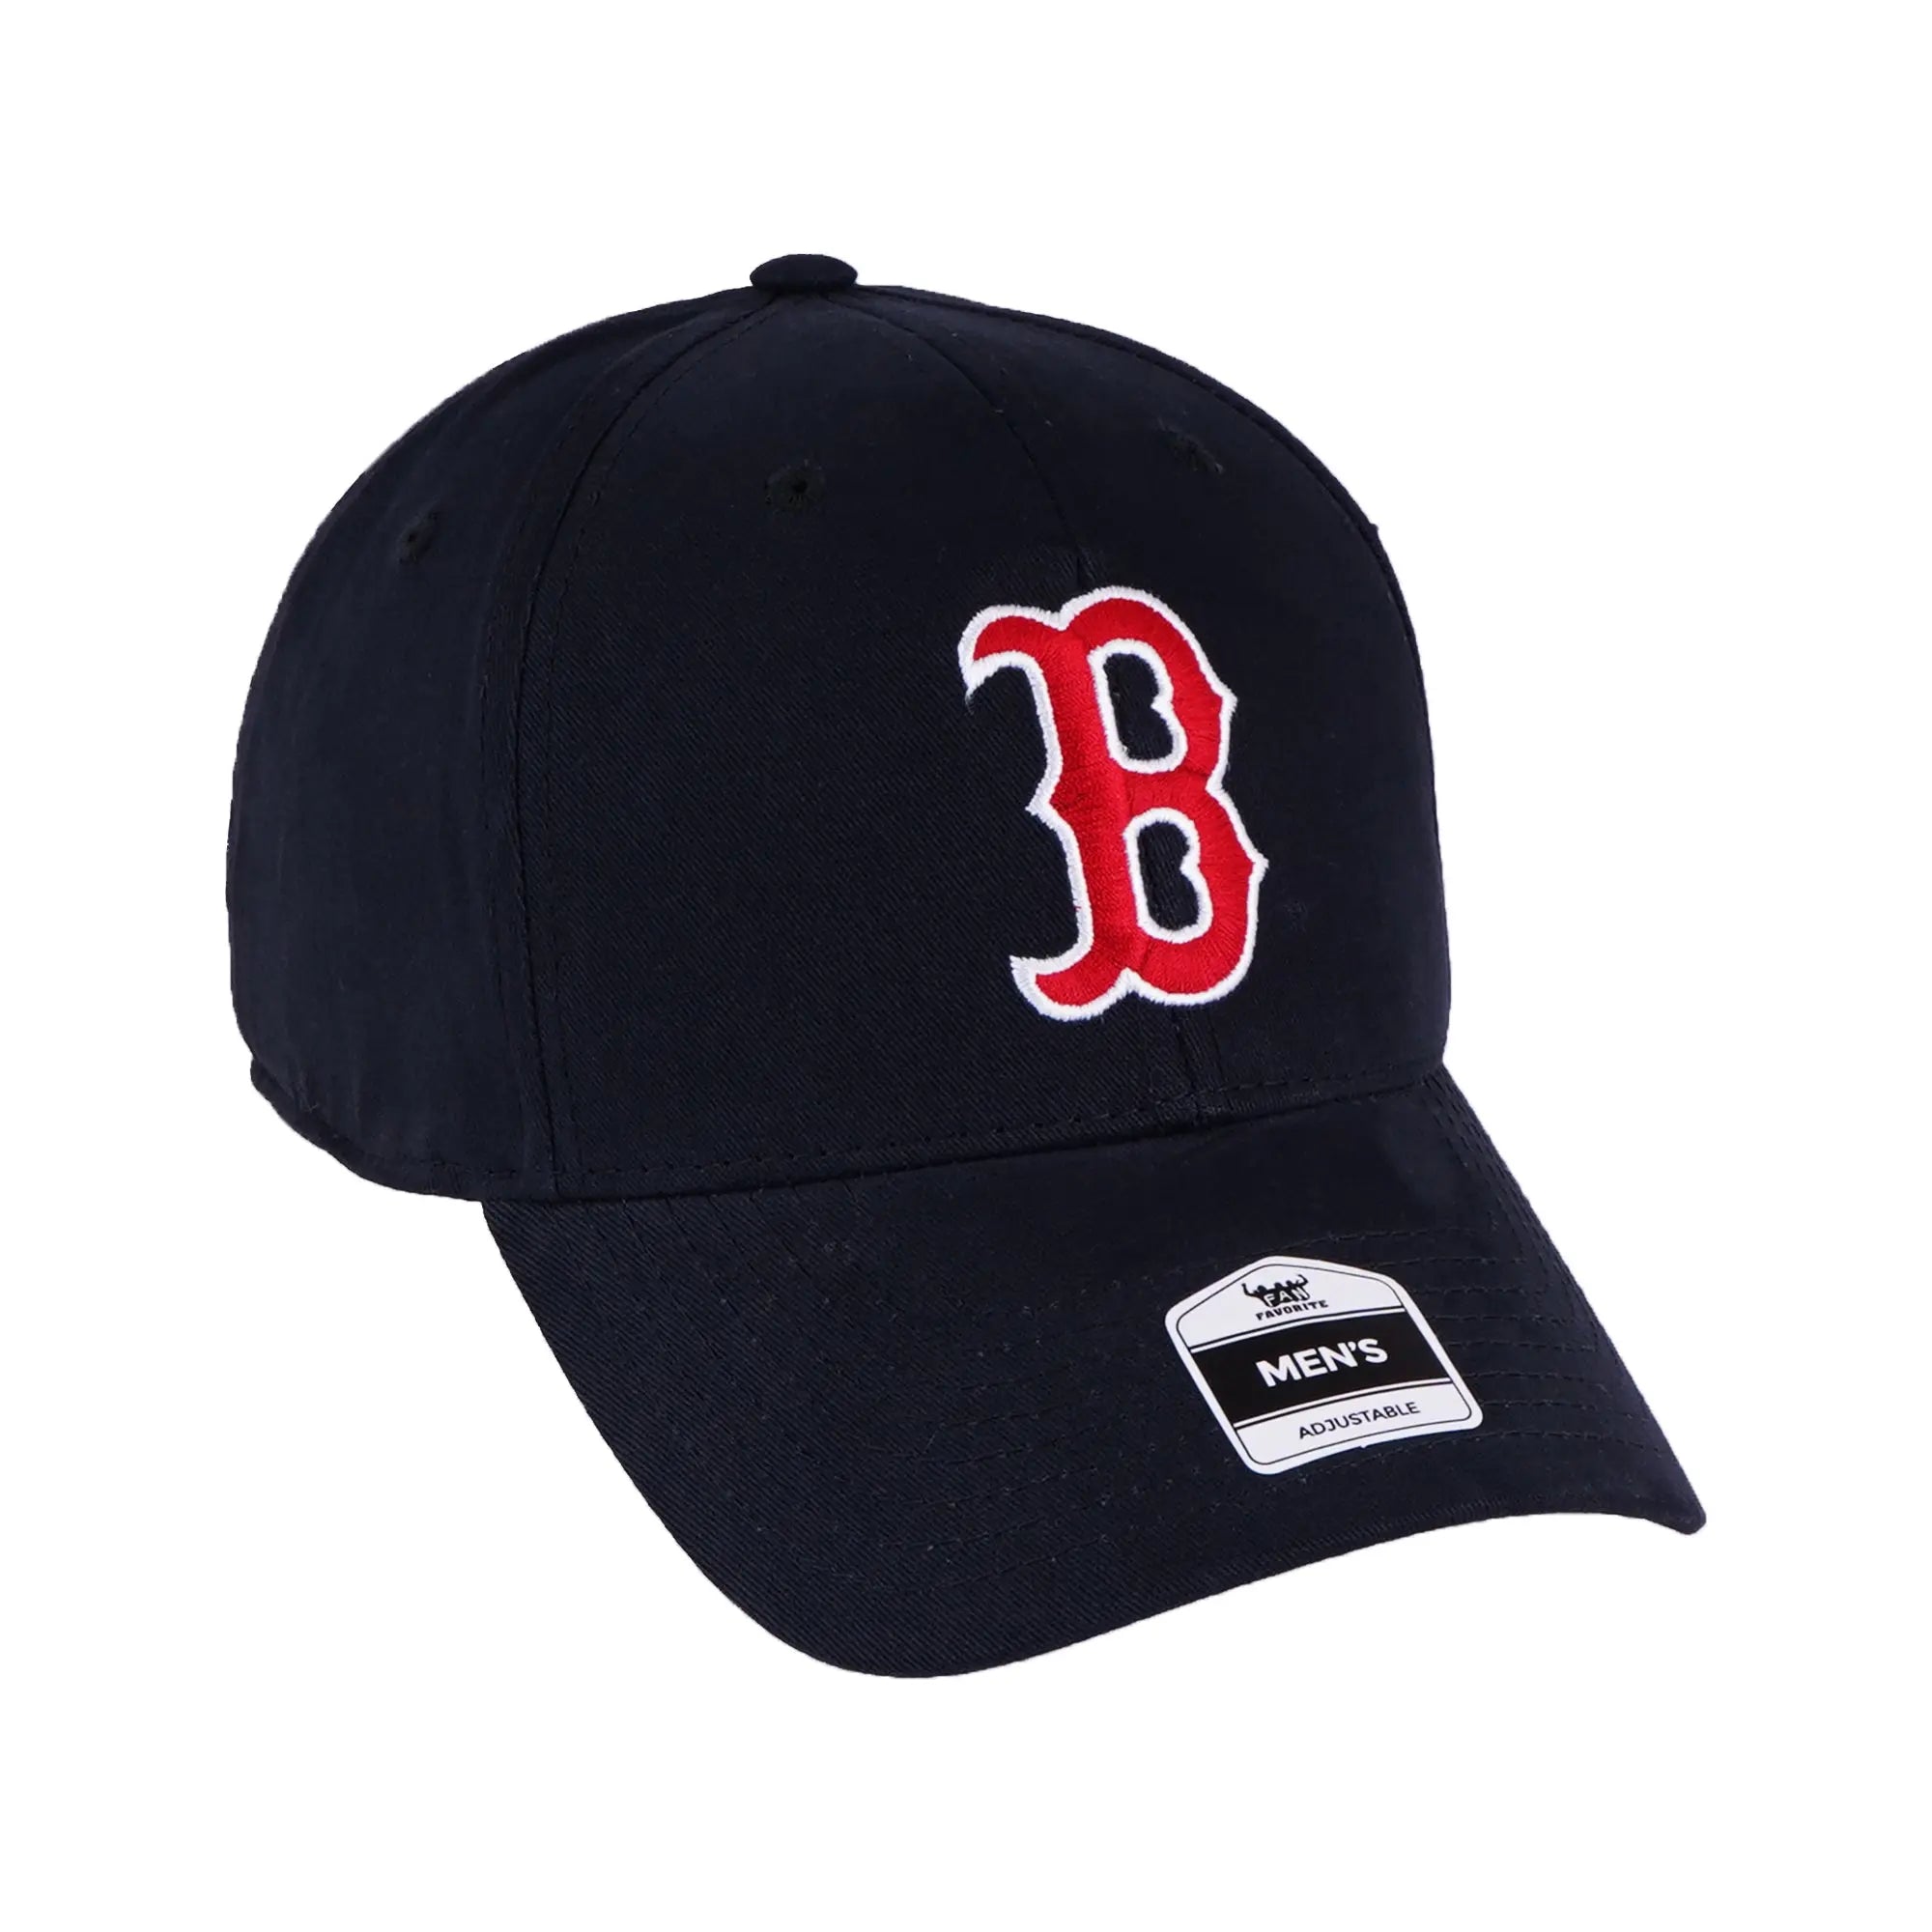 MLB Boston Red Sox Women's Team Core Adjustable Hat Officially licensed - Navy Trendy Zone 21